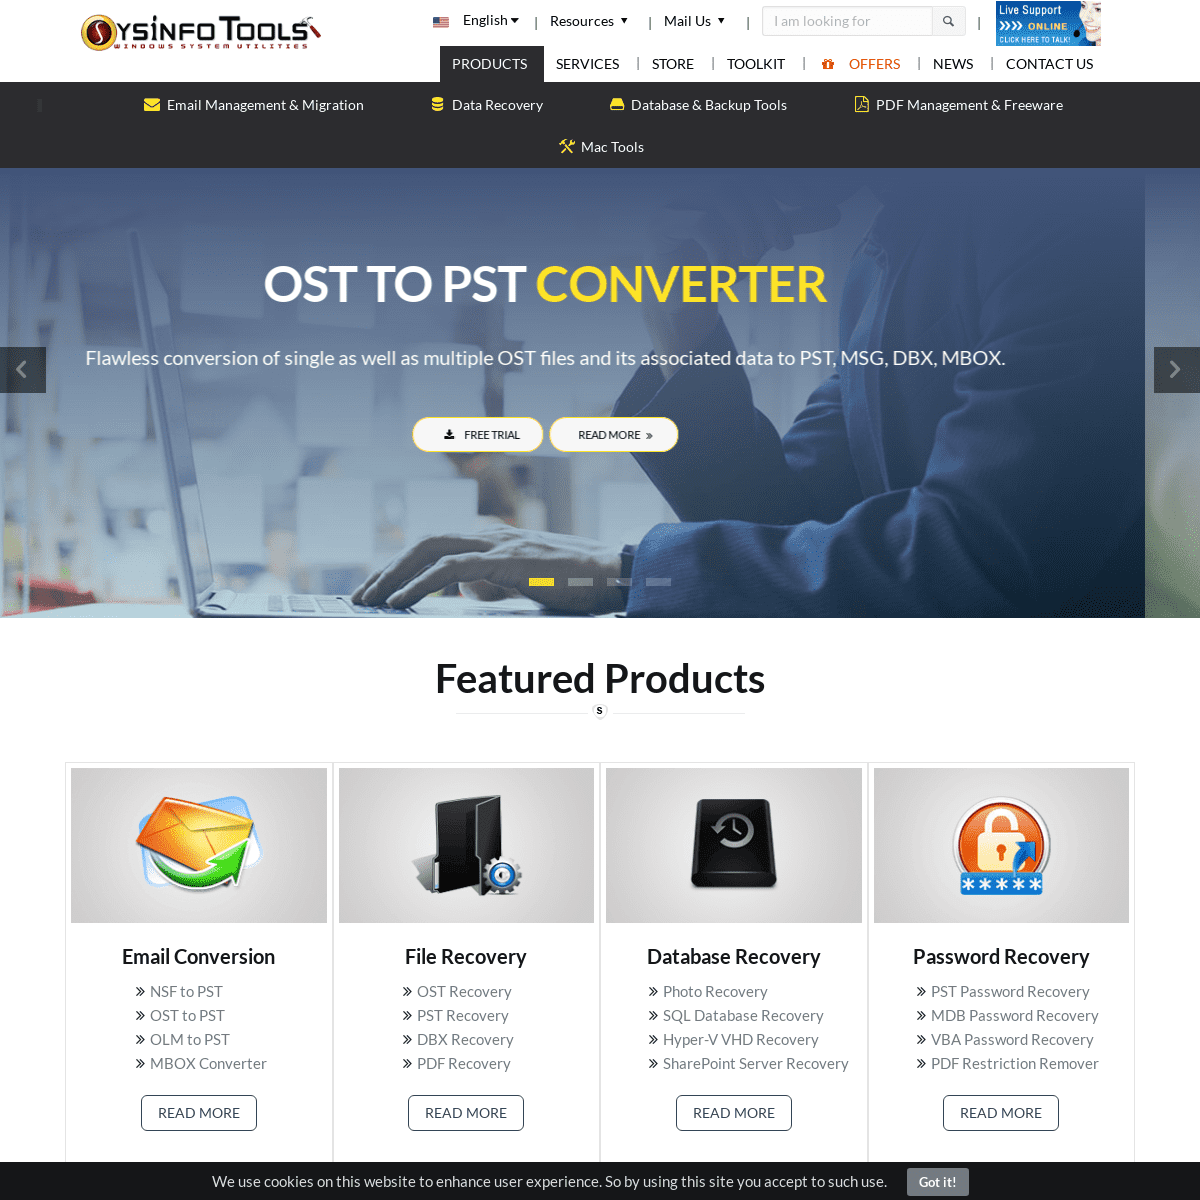 SysInfoTools Software - Free Data Recovery & Email Migration  Tools - Official Website